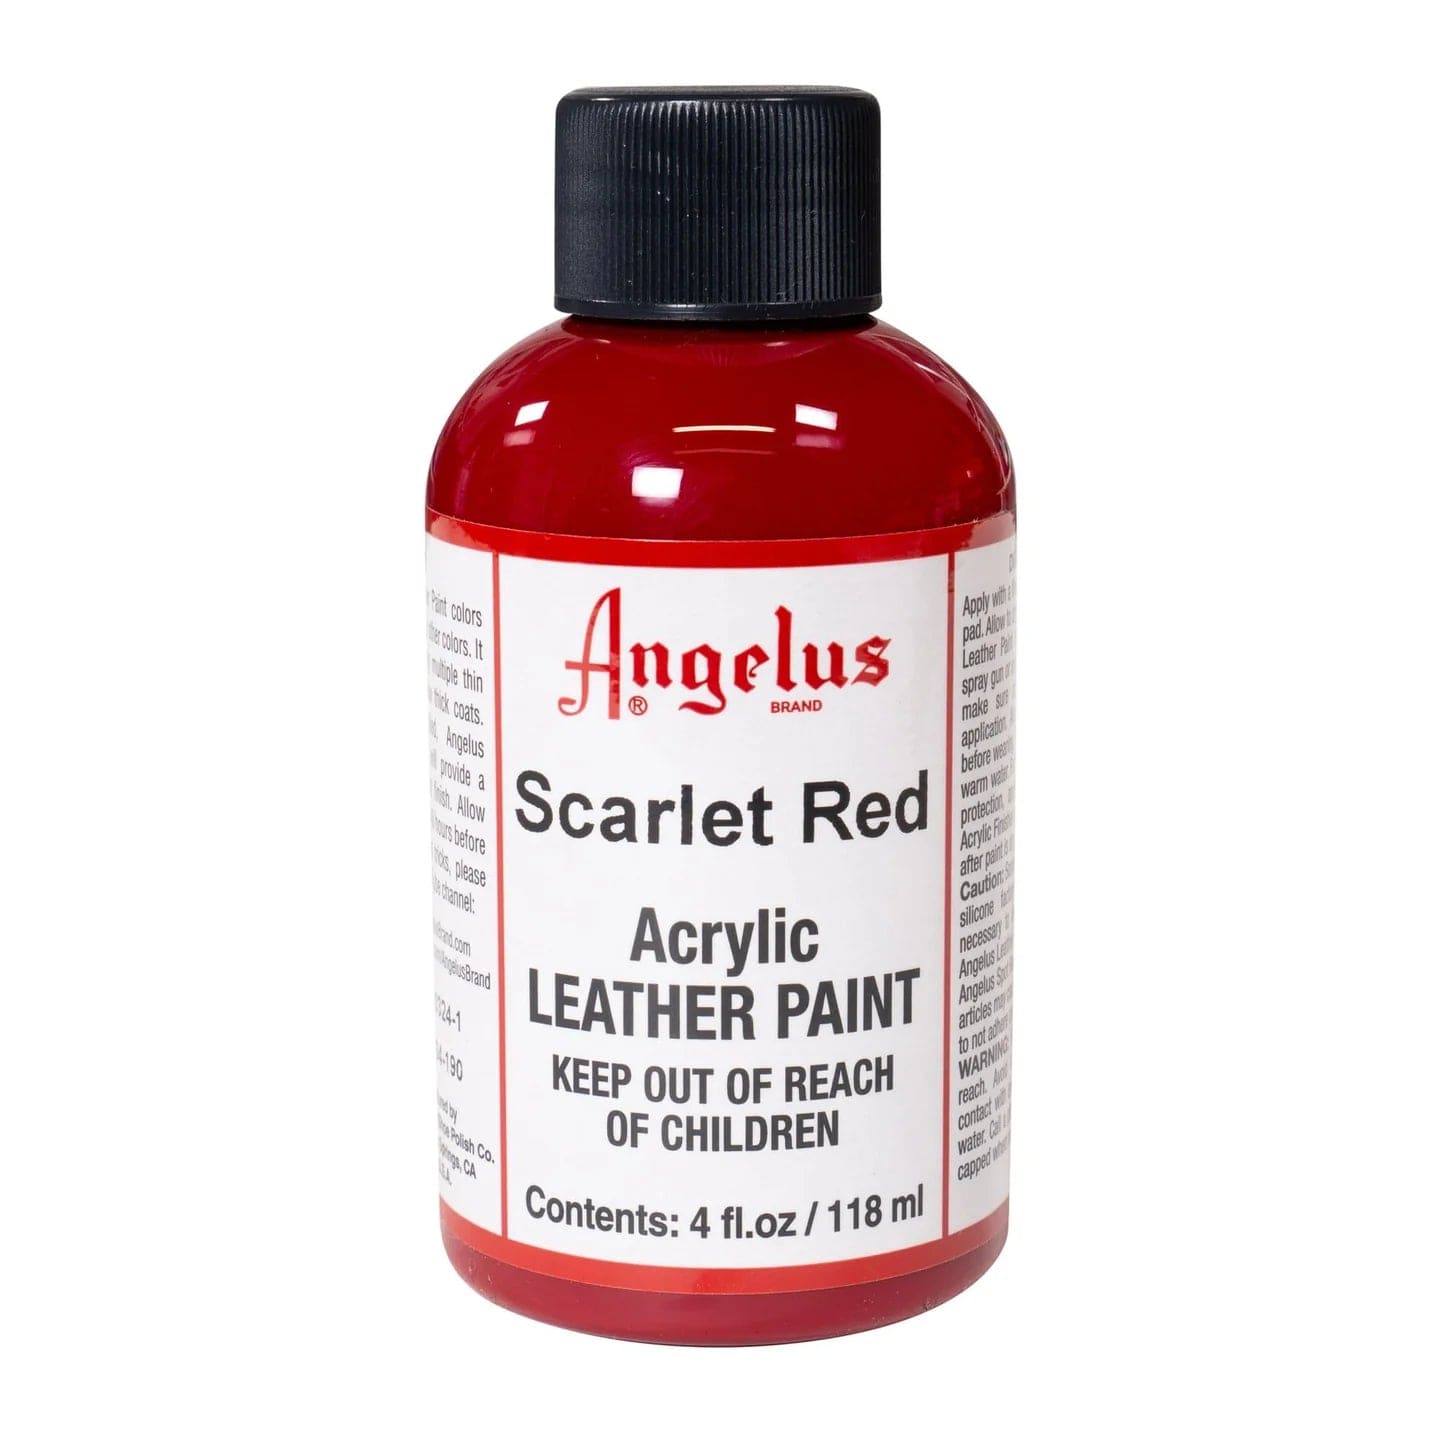 Angelus Acrylic Leather Paint Scarlet Red Angelus - Acrylic Leather Paints - 4oz Bottles